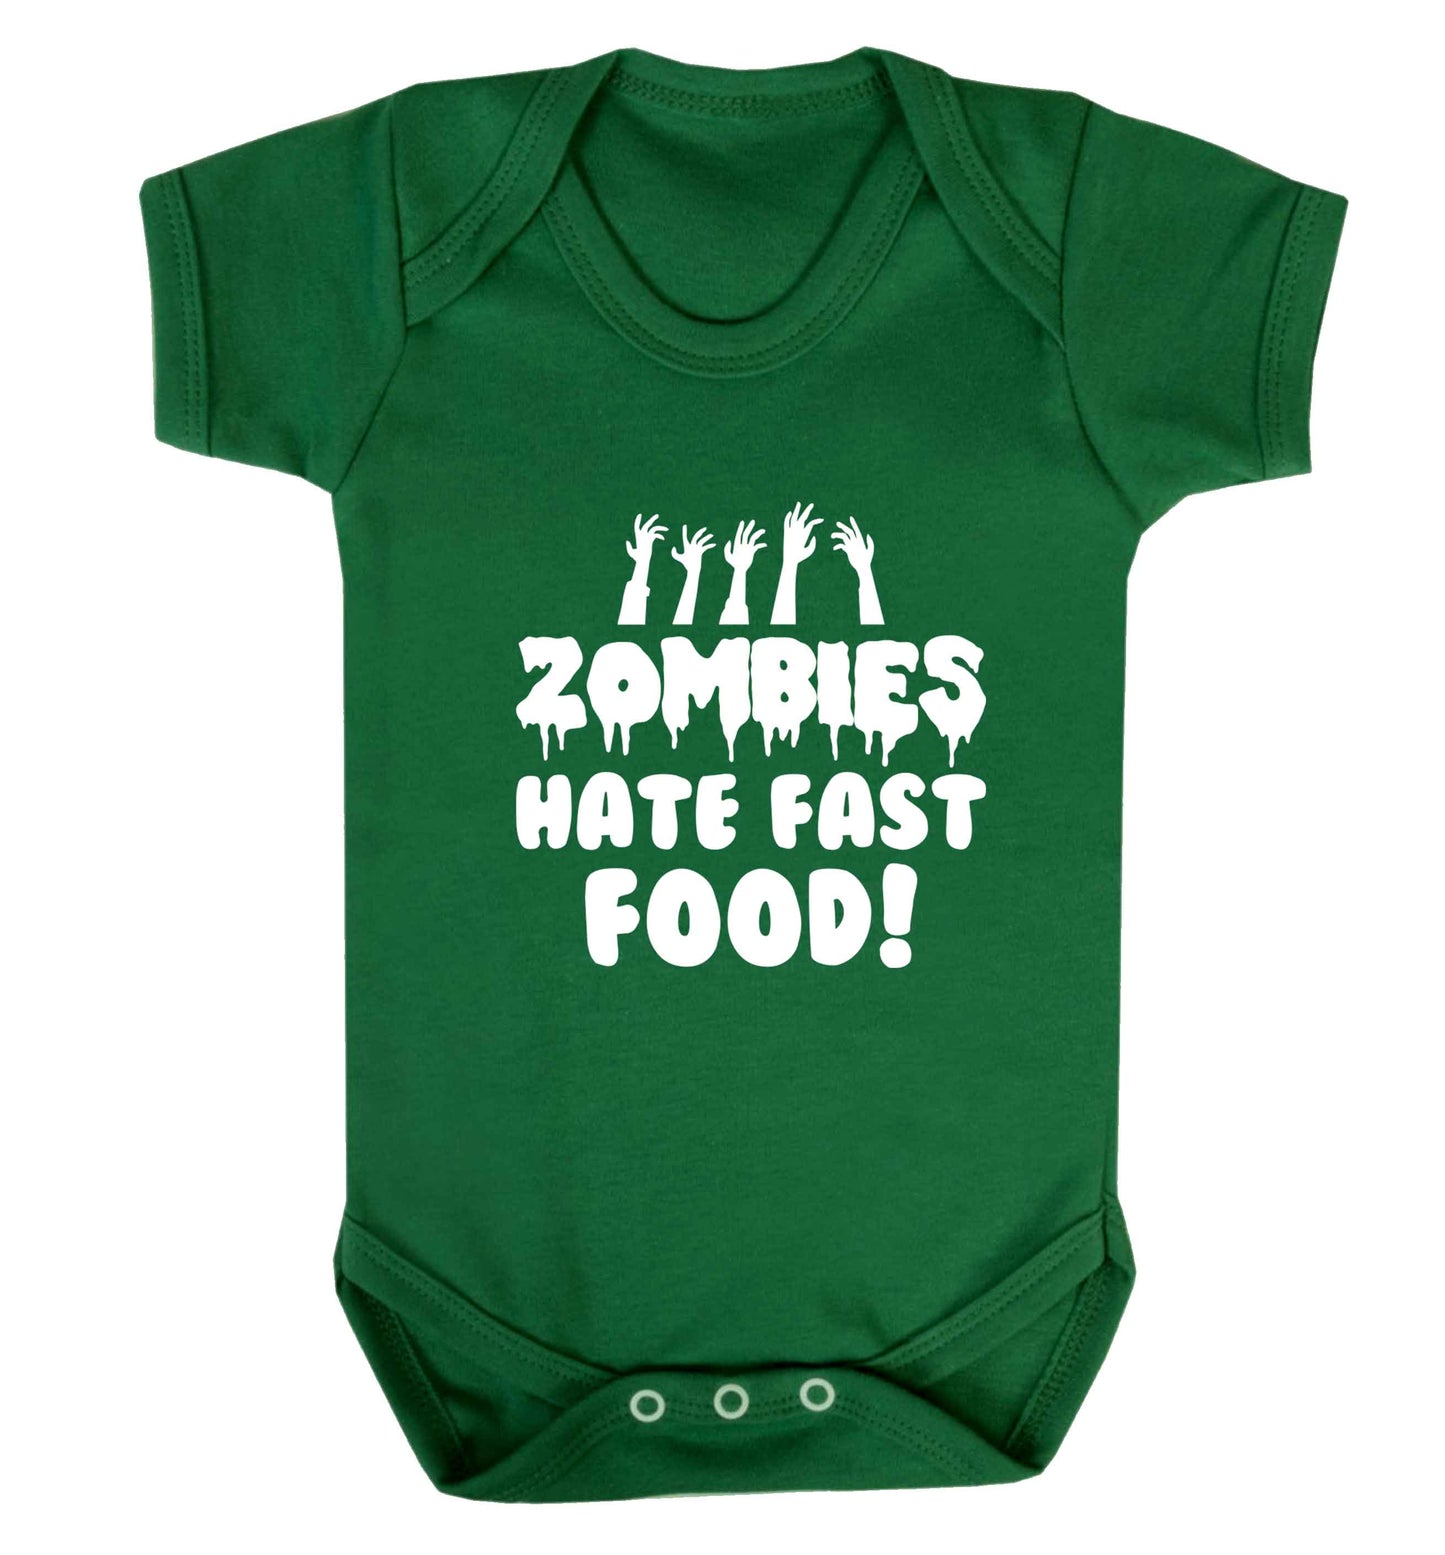 Zombies hate fast food baby vest green 18-24 months